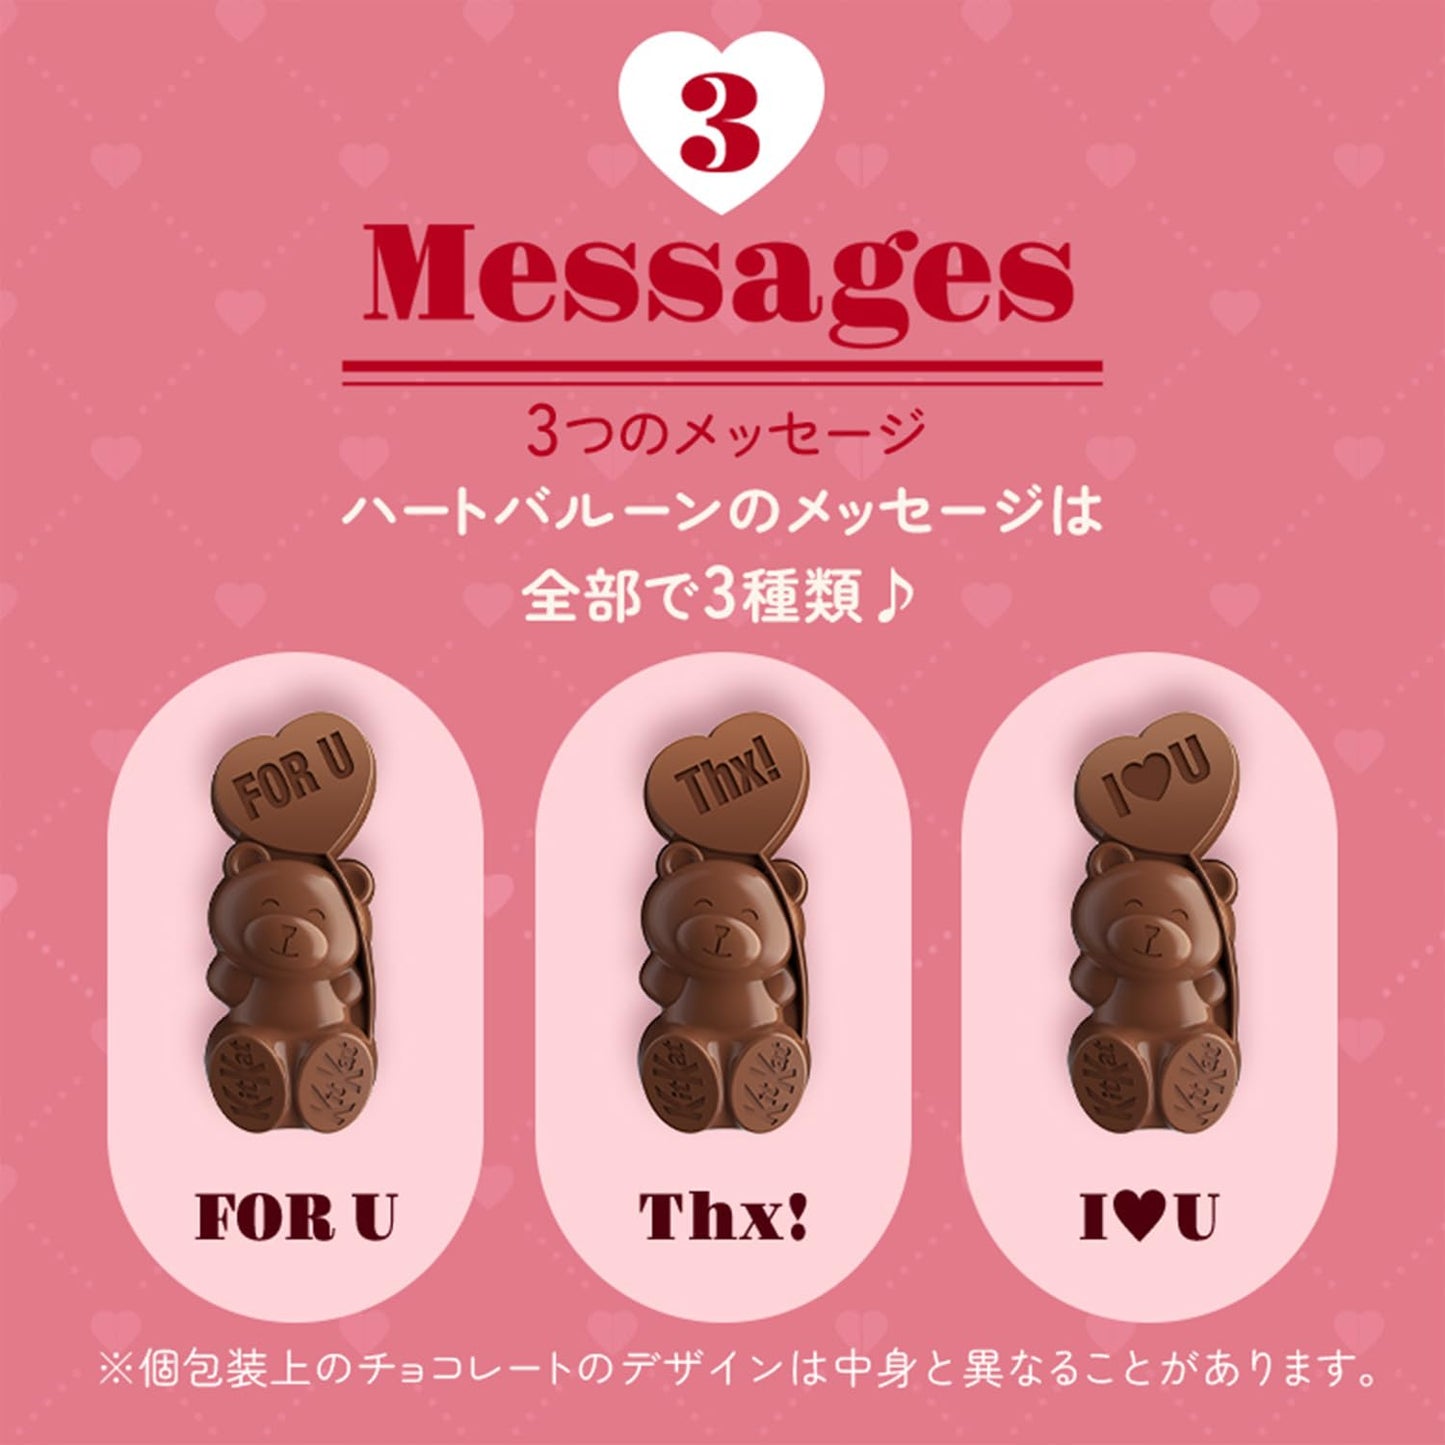 Nestle Japan KitKat Heartful Bear Heart Shaped Can 7 Special Kitkat Pieces Inside | Made in Japan | Valentine's Day Gift | Gift Box | Kitkat from Japan